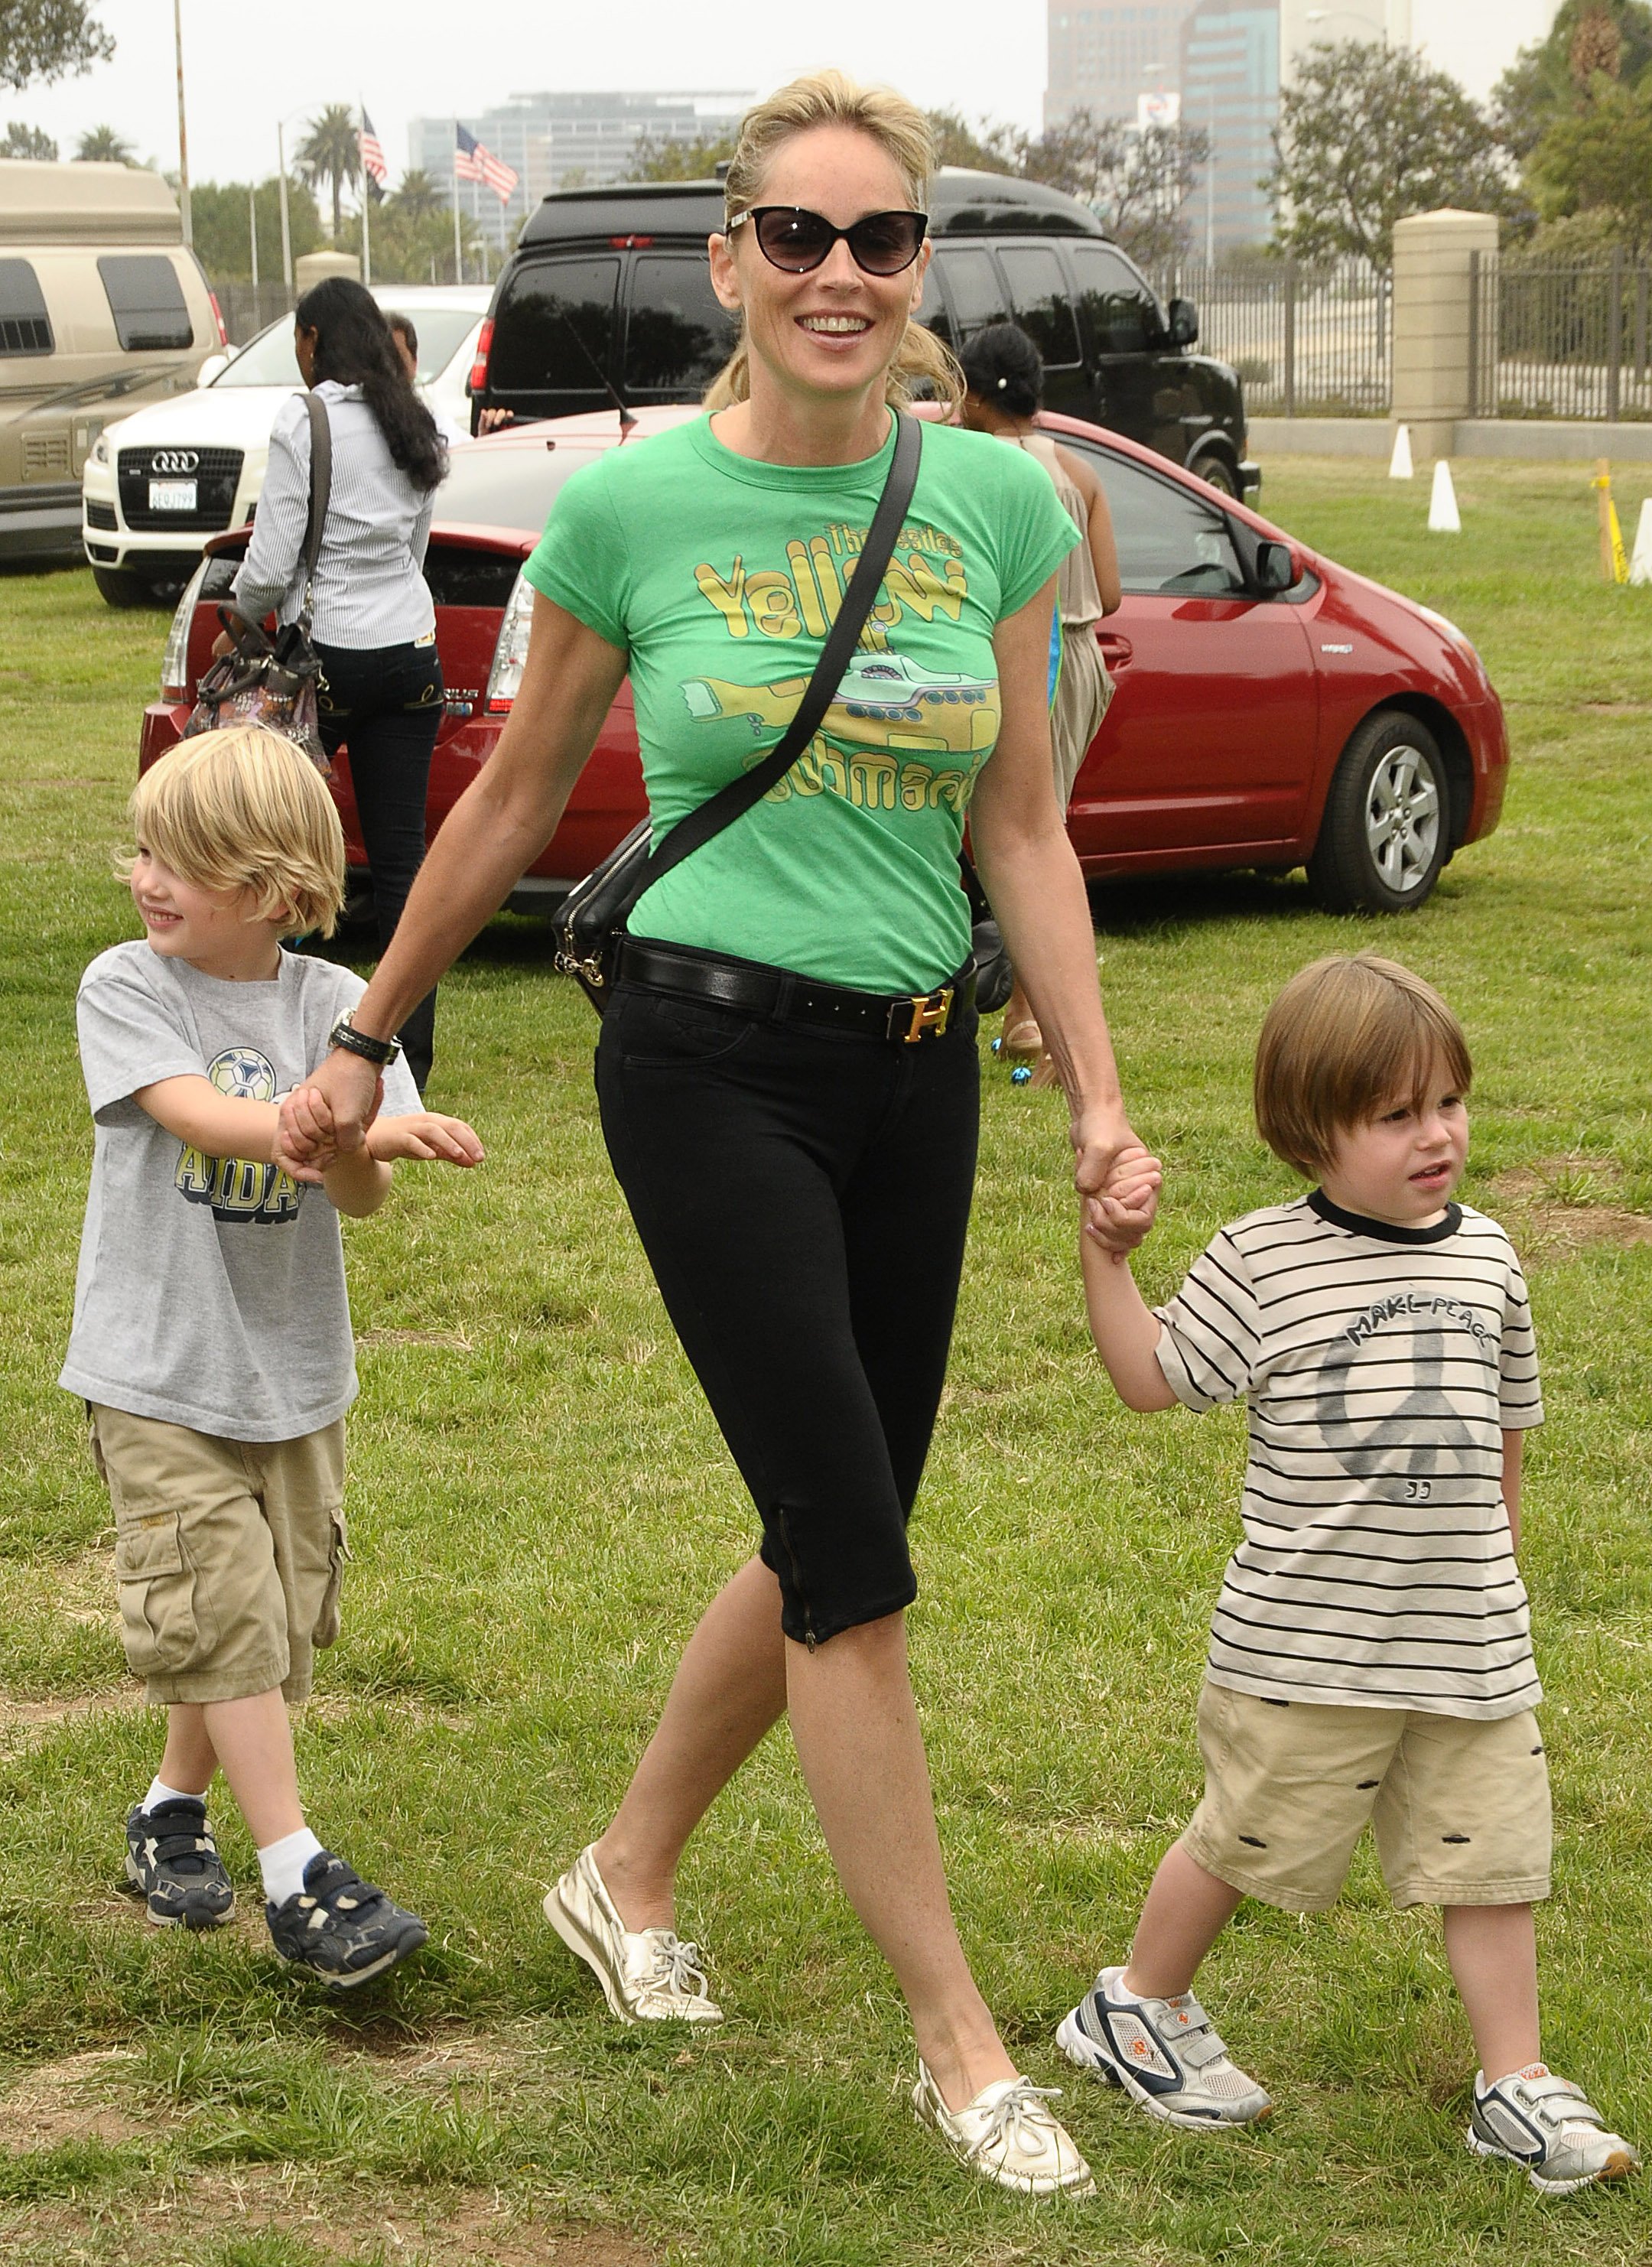 Sharon Stone and sons Laird Vonne Stone and Quinn Kelly Stone at the 21st annual "A Time For Heroes" celebrity picnic benefit in 2010 in Los Angeles, California. | Source: Getty Images